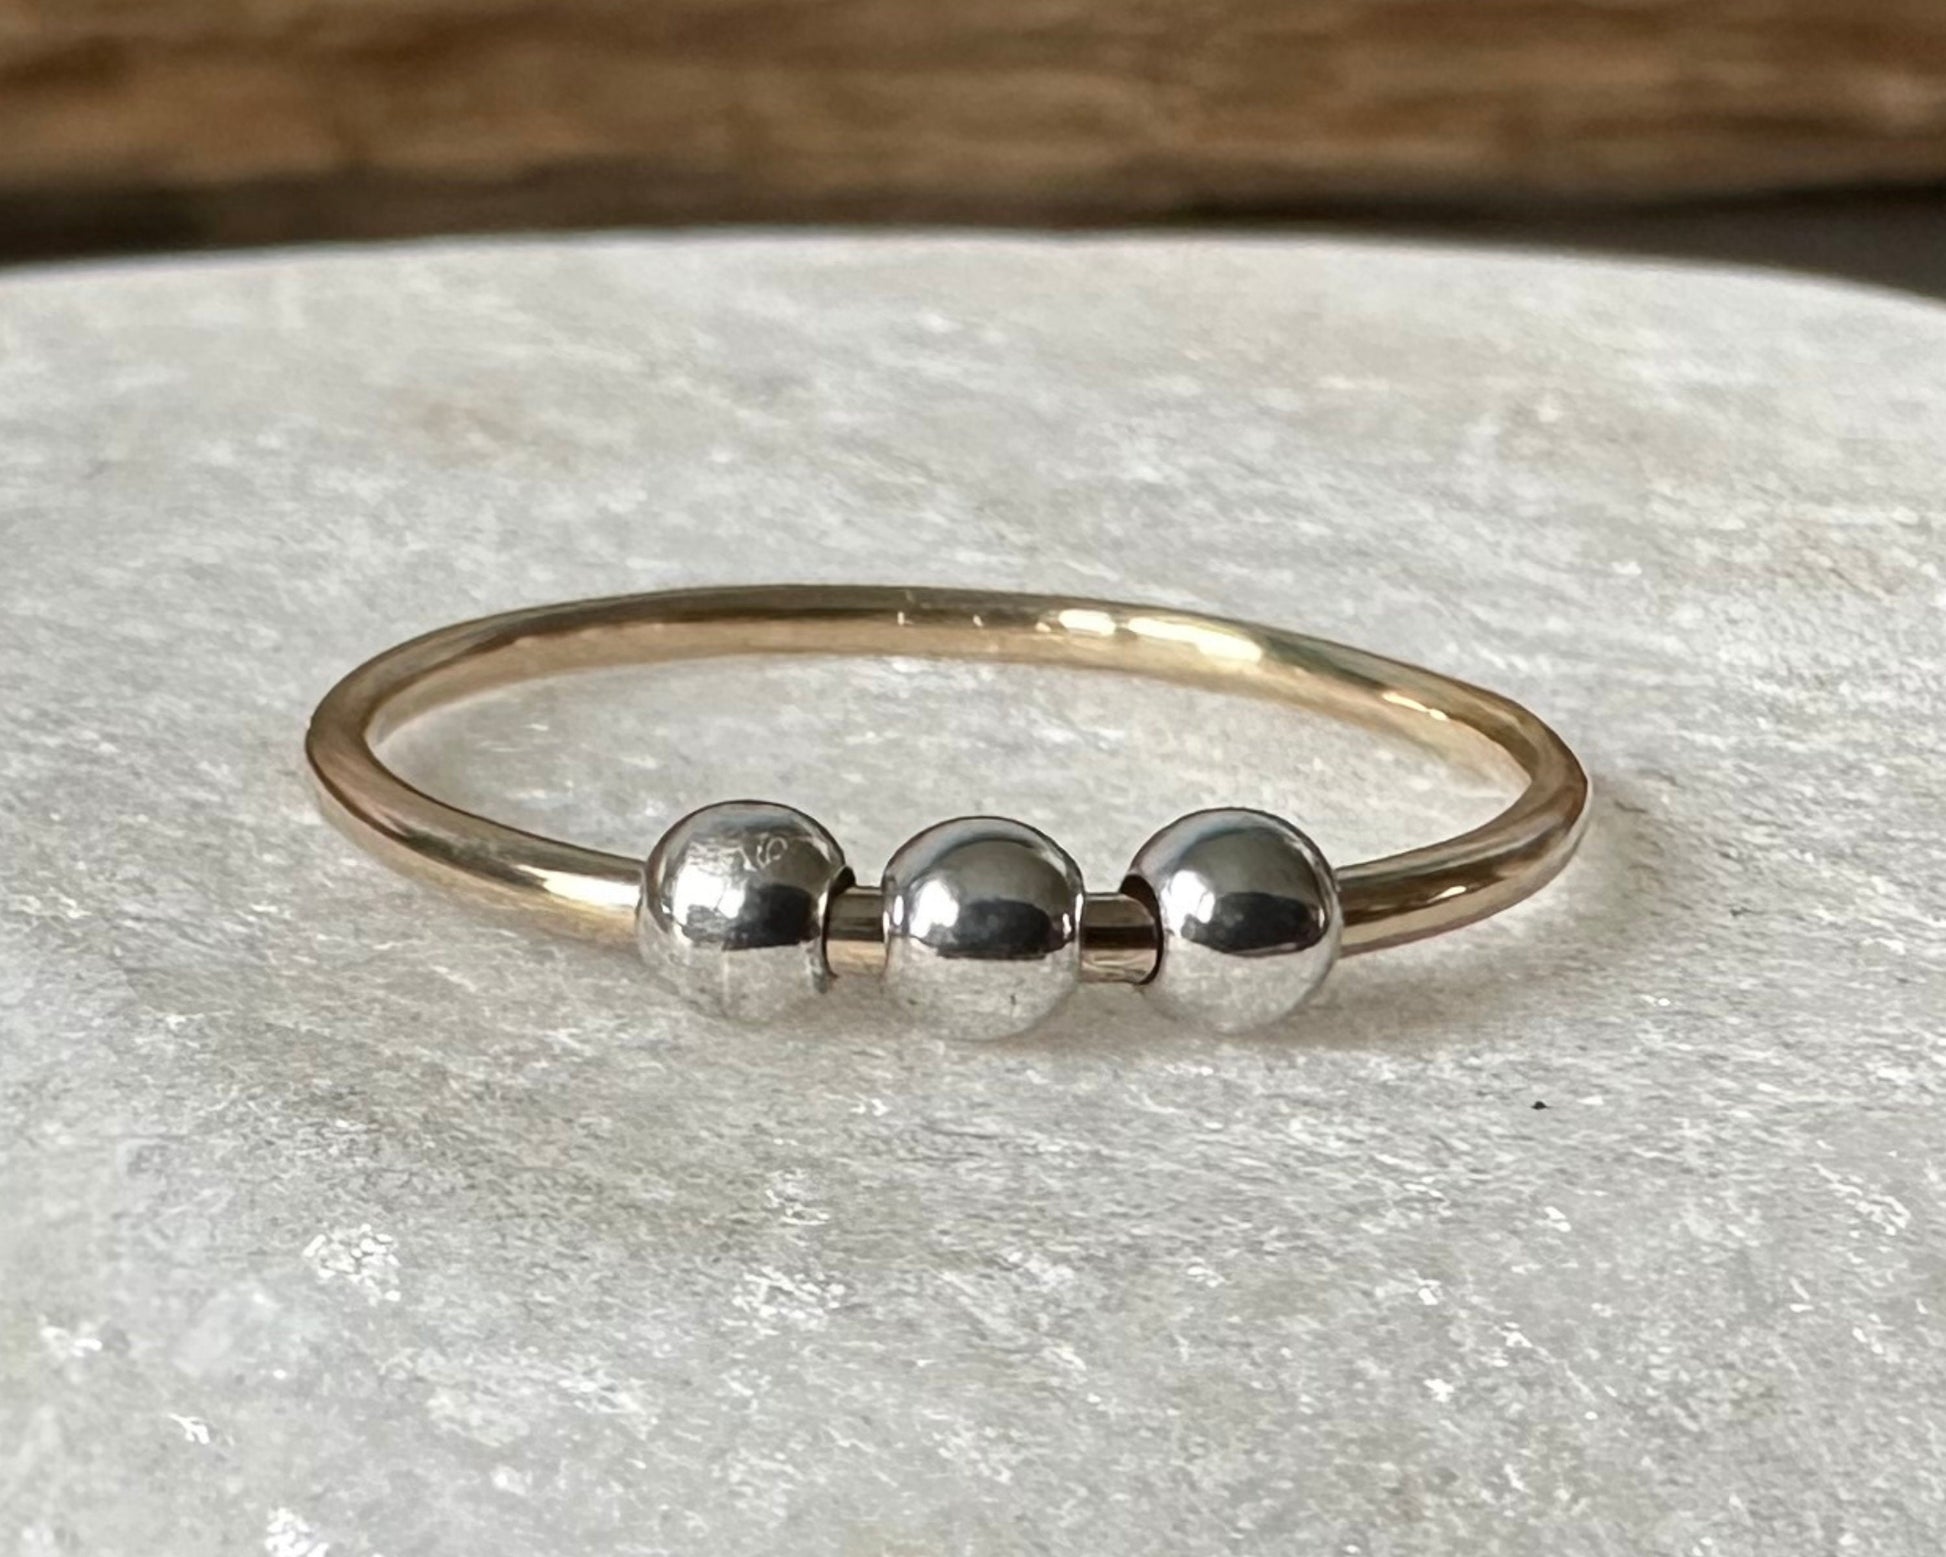 Fidget Ring Handmade from 9ct Gold and Sterling Silver Beads, 1.2mm Gold Stackable Ring Band, Anxiety Ring, Spinner Ring